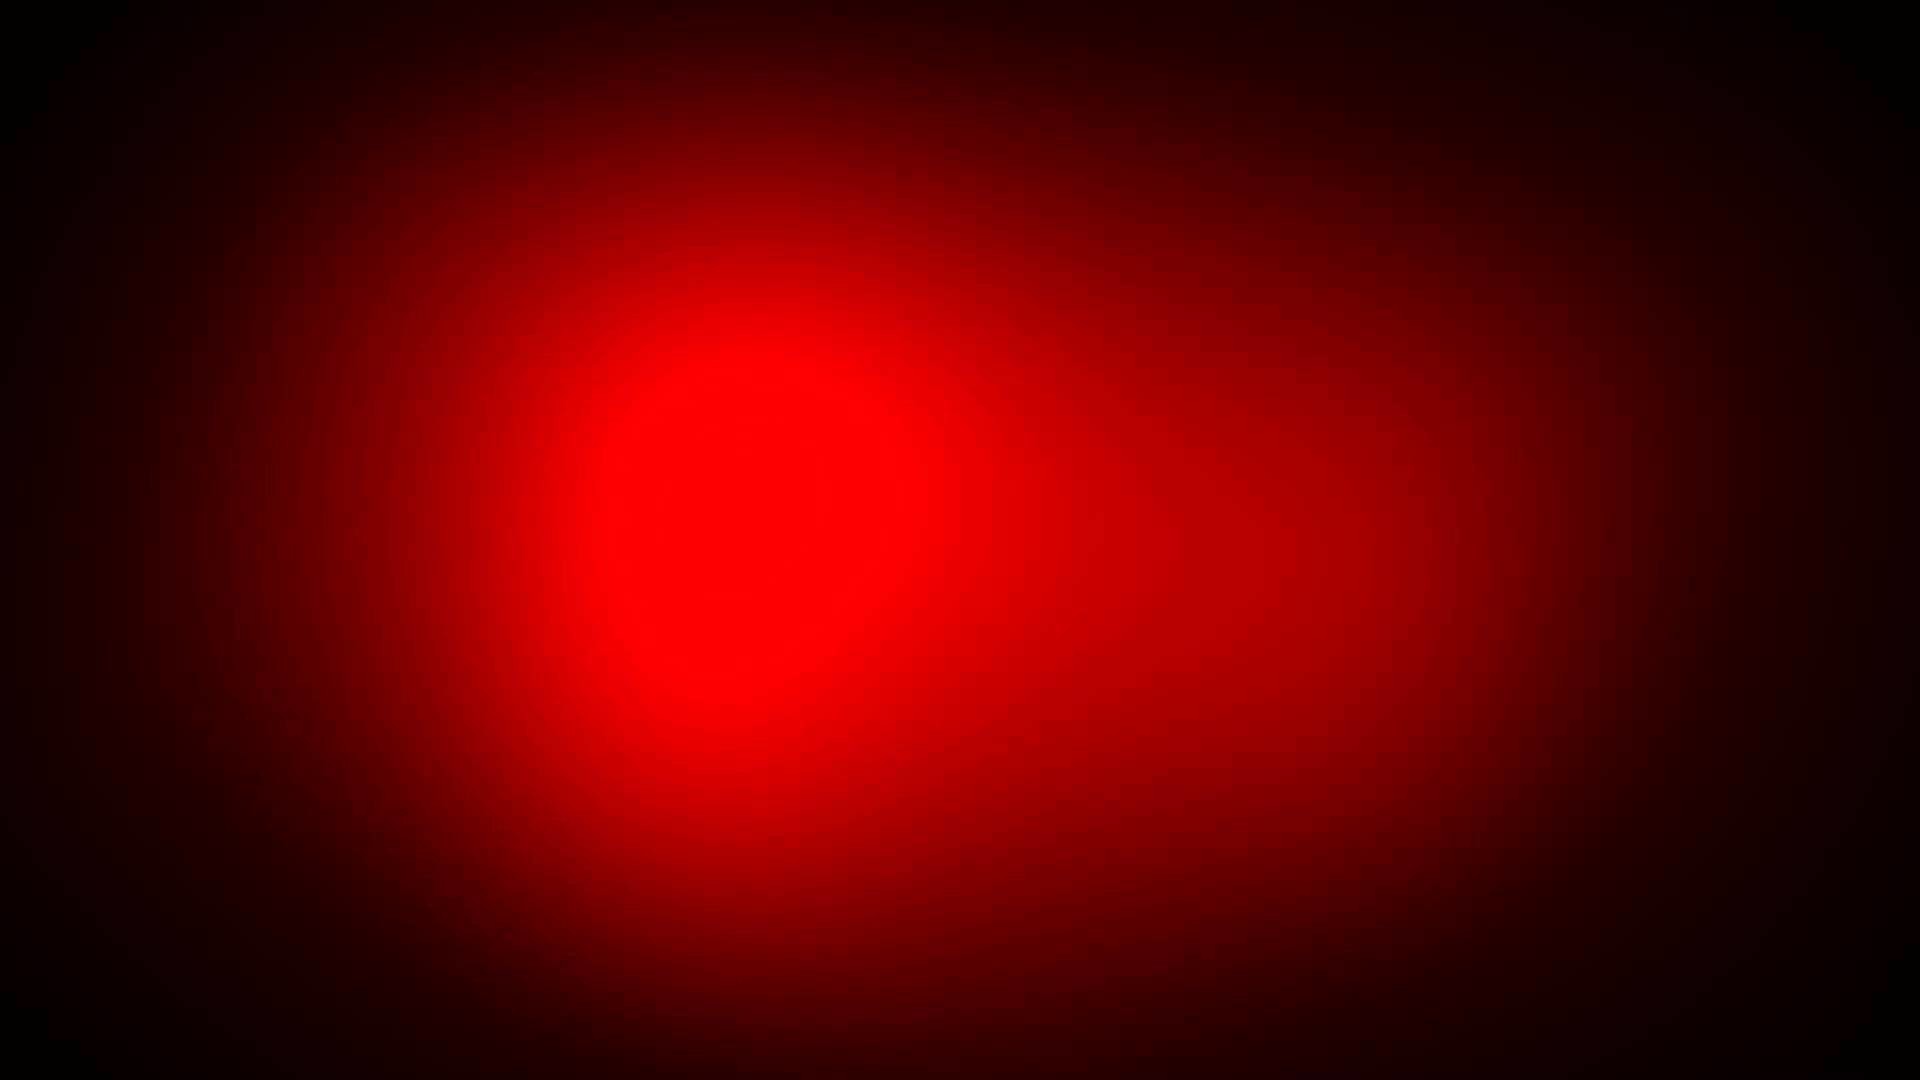 1920x1080 spirits-red - FREE Video Background HD Loops 1080p - YouTube